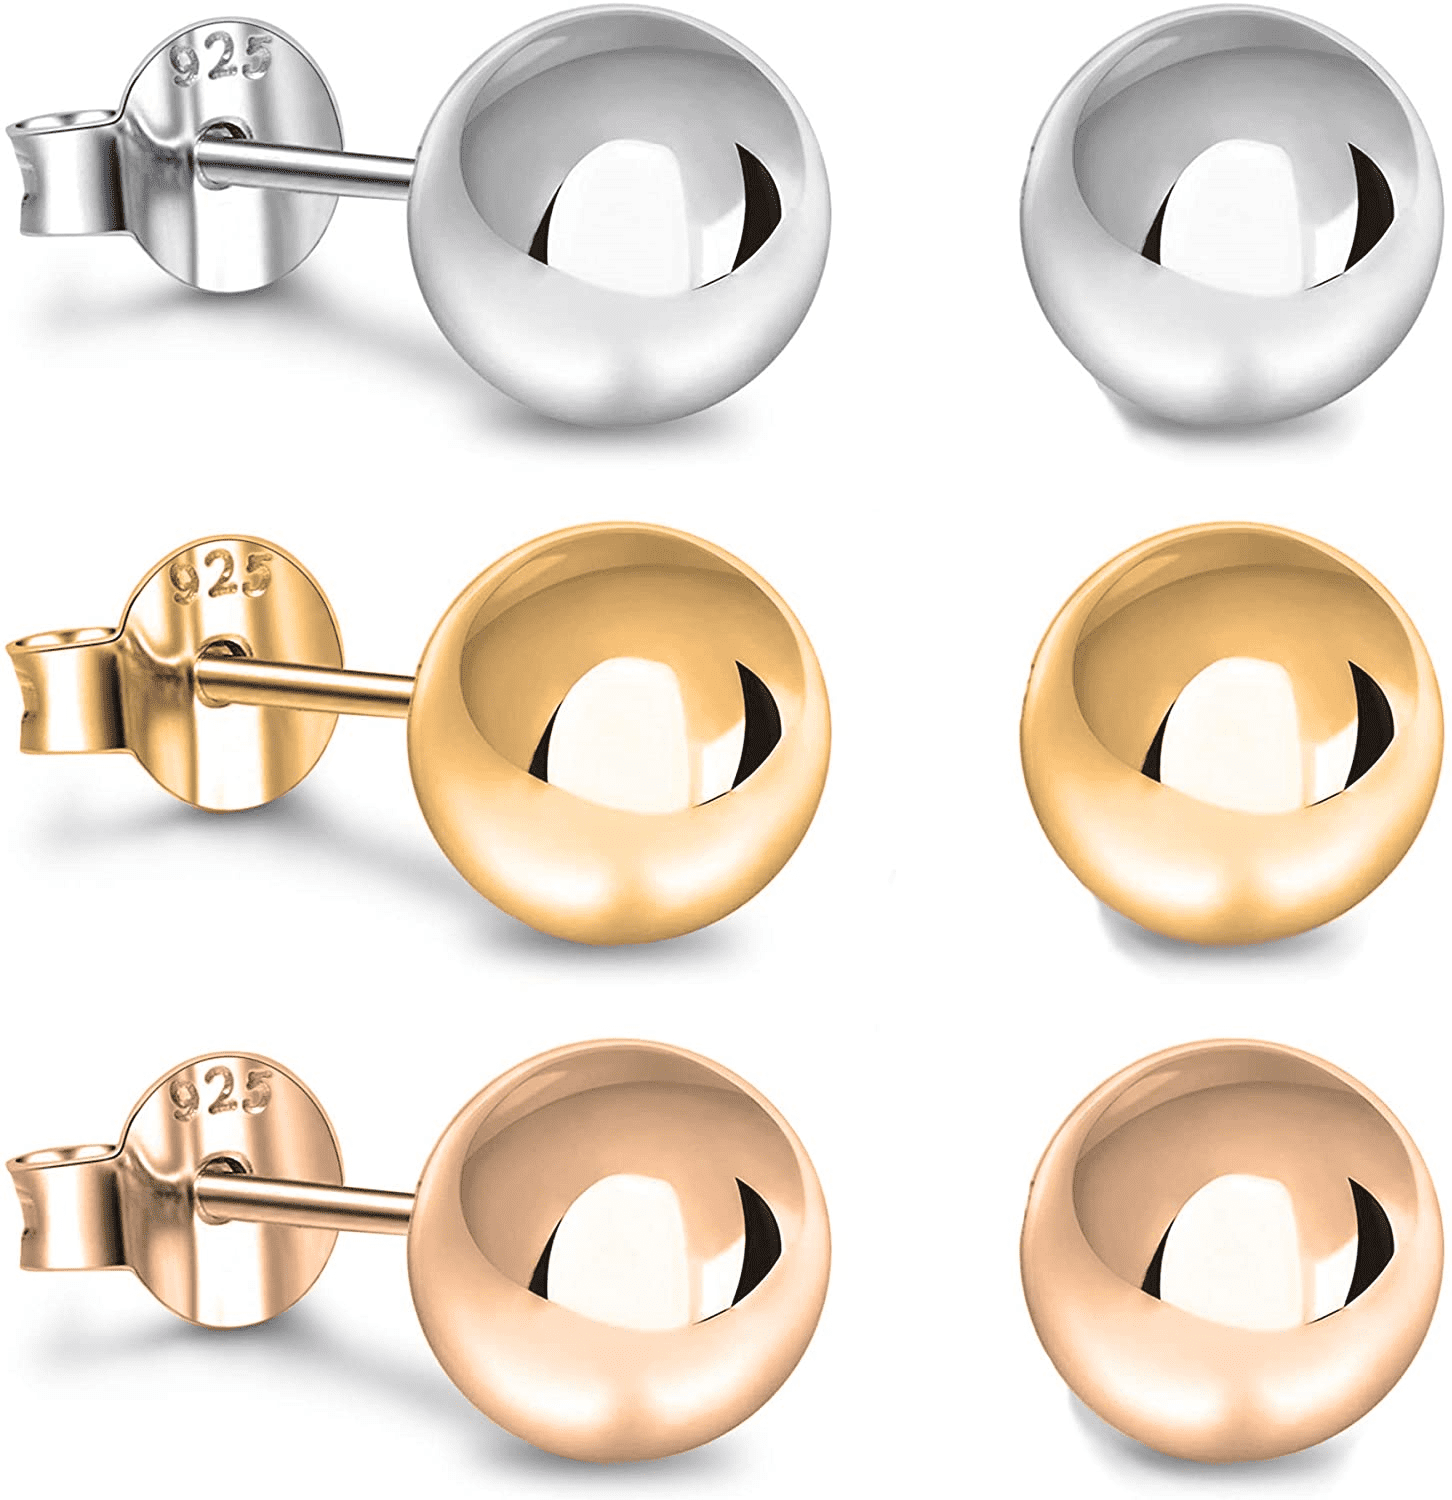 BUY 3 GET 1 FREE 925 sterling silver BALL "18k GOLD plated" studs earring UNISEX 